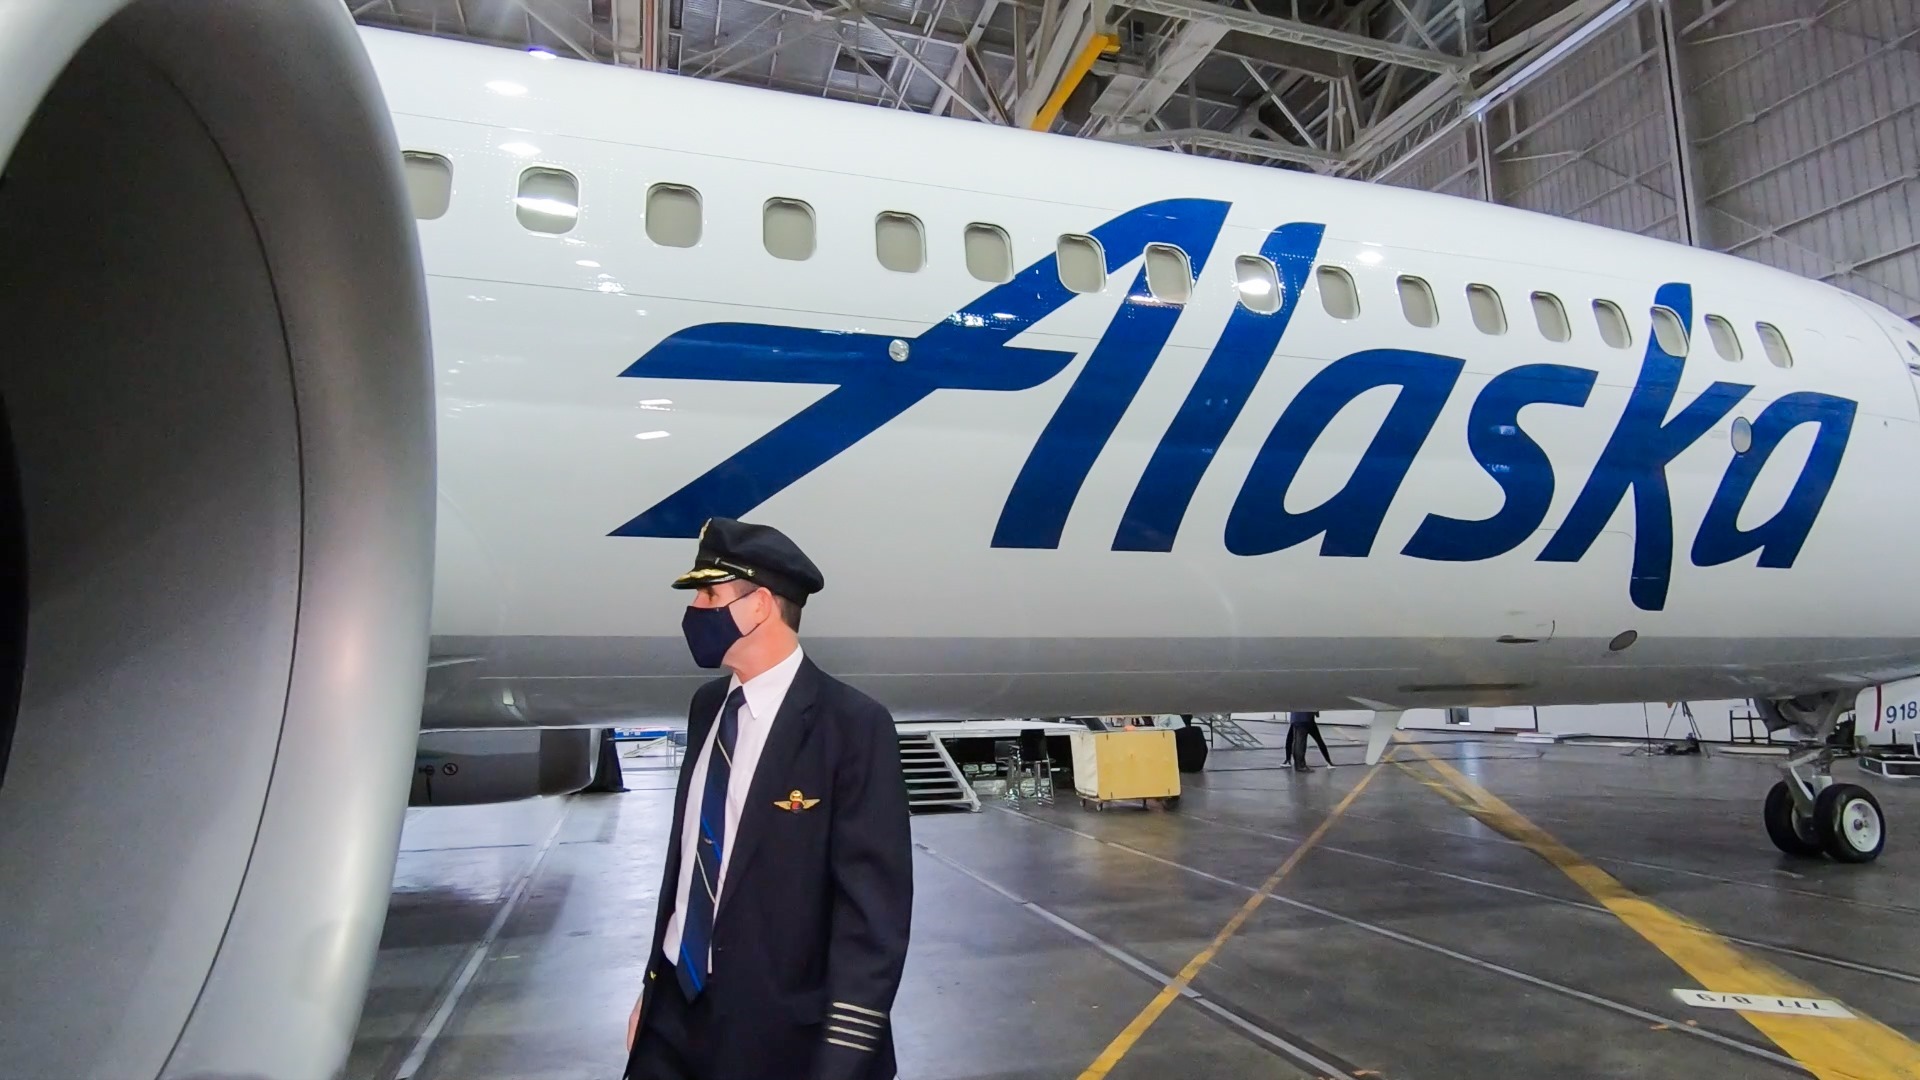 A pilot wearing a uniform and a face mask is standing in front of an Alaska Airlines airplane inside a hangar. The airplane has the word "Alaska" prominently displayed on its side. The hangar is spacious with various equipment and machinery visible in the background.